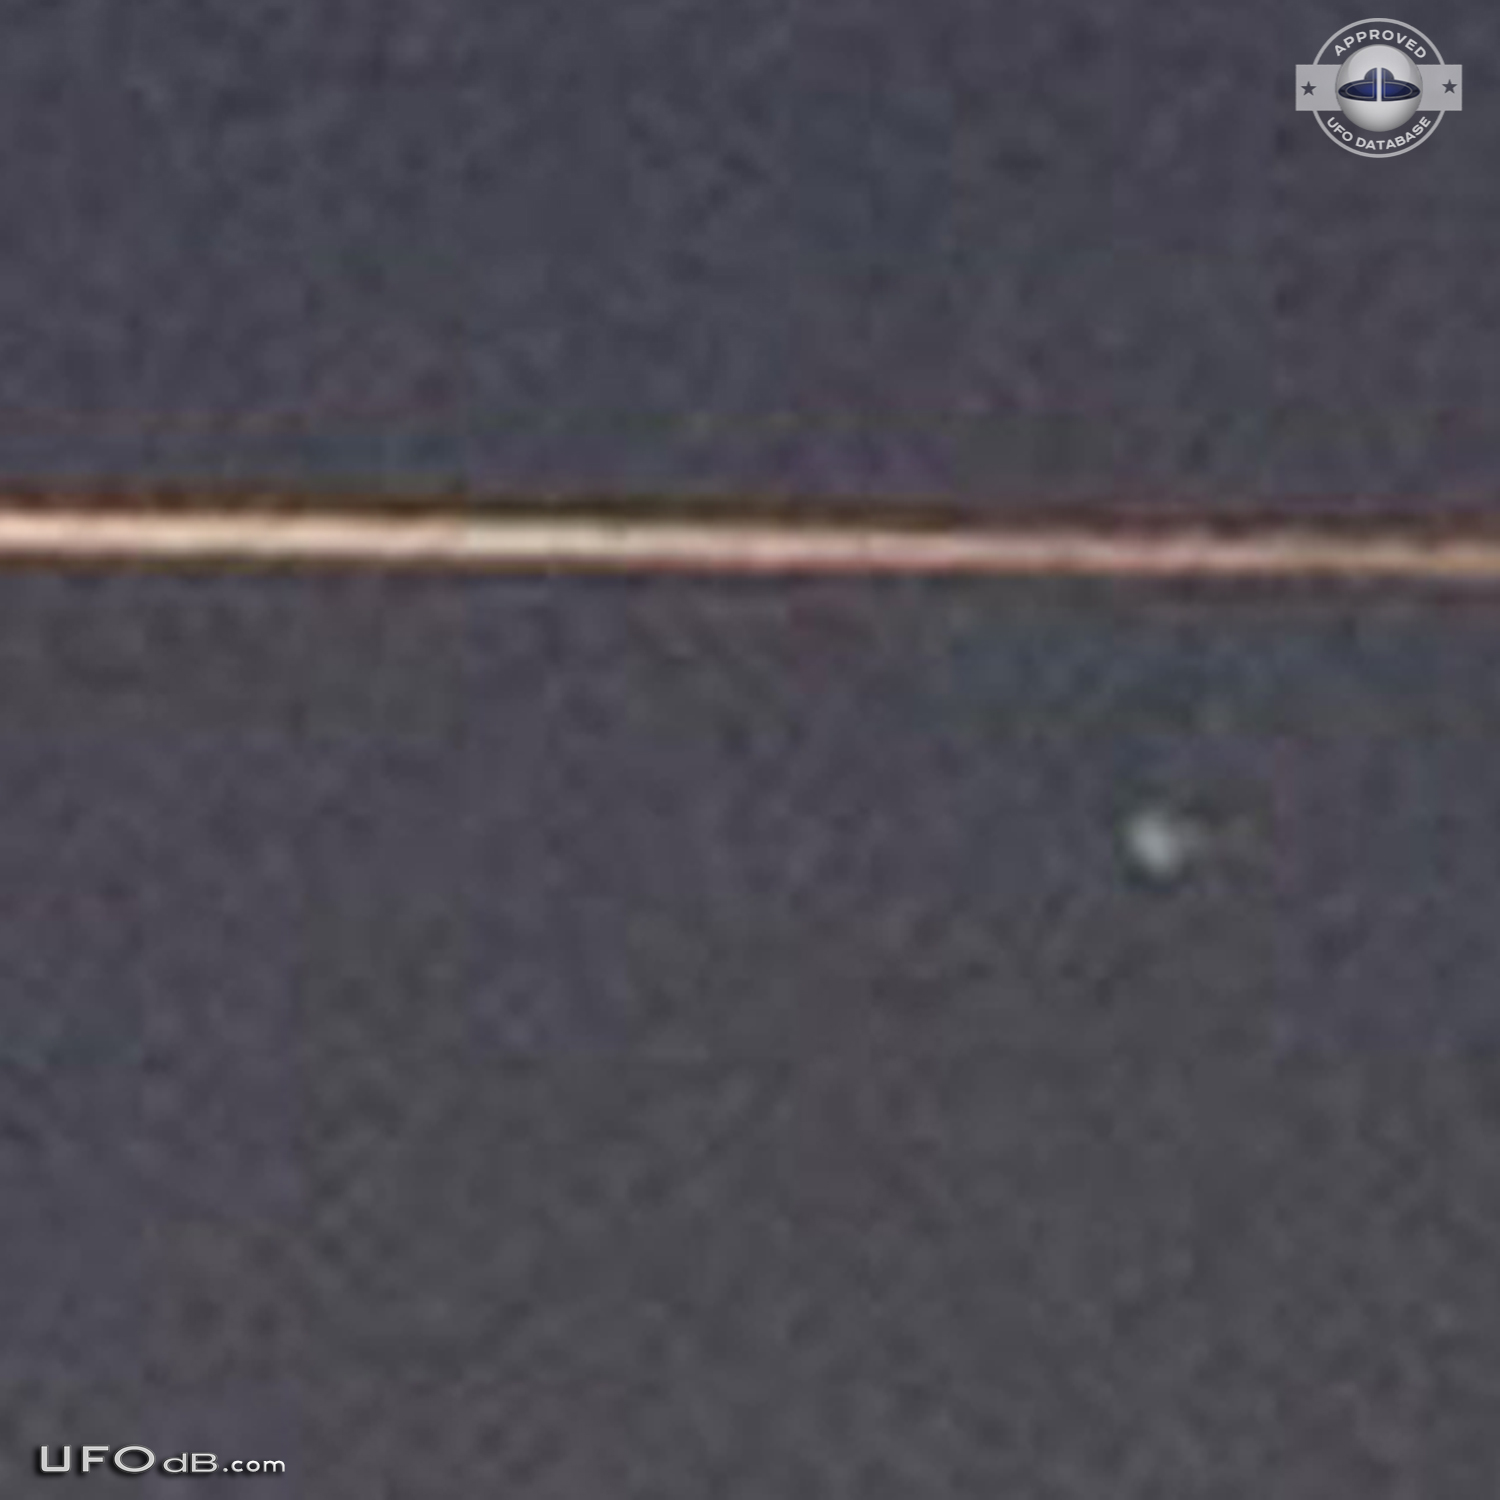 Photos of vaportrail in sunrise get UFO near plane in Evant Texas 2012 UFO Picture #519-4